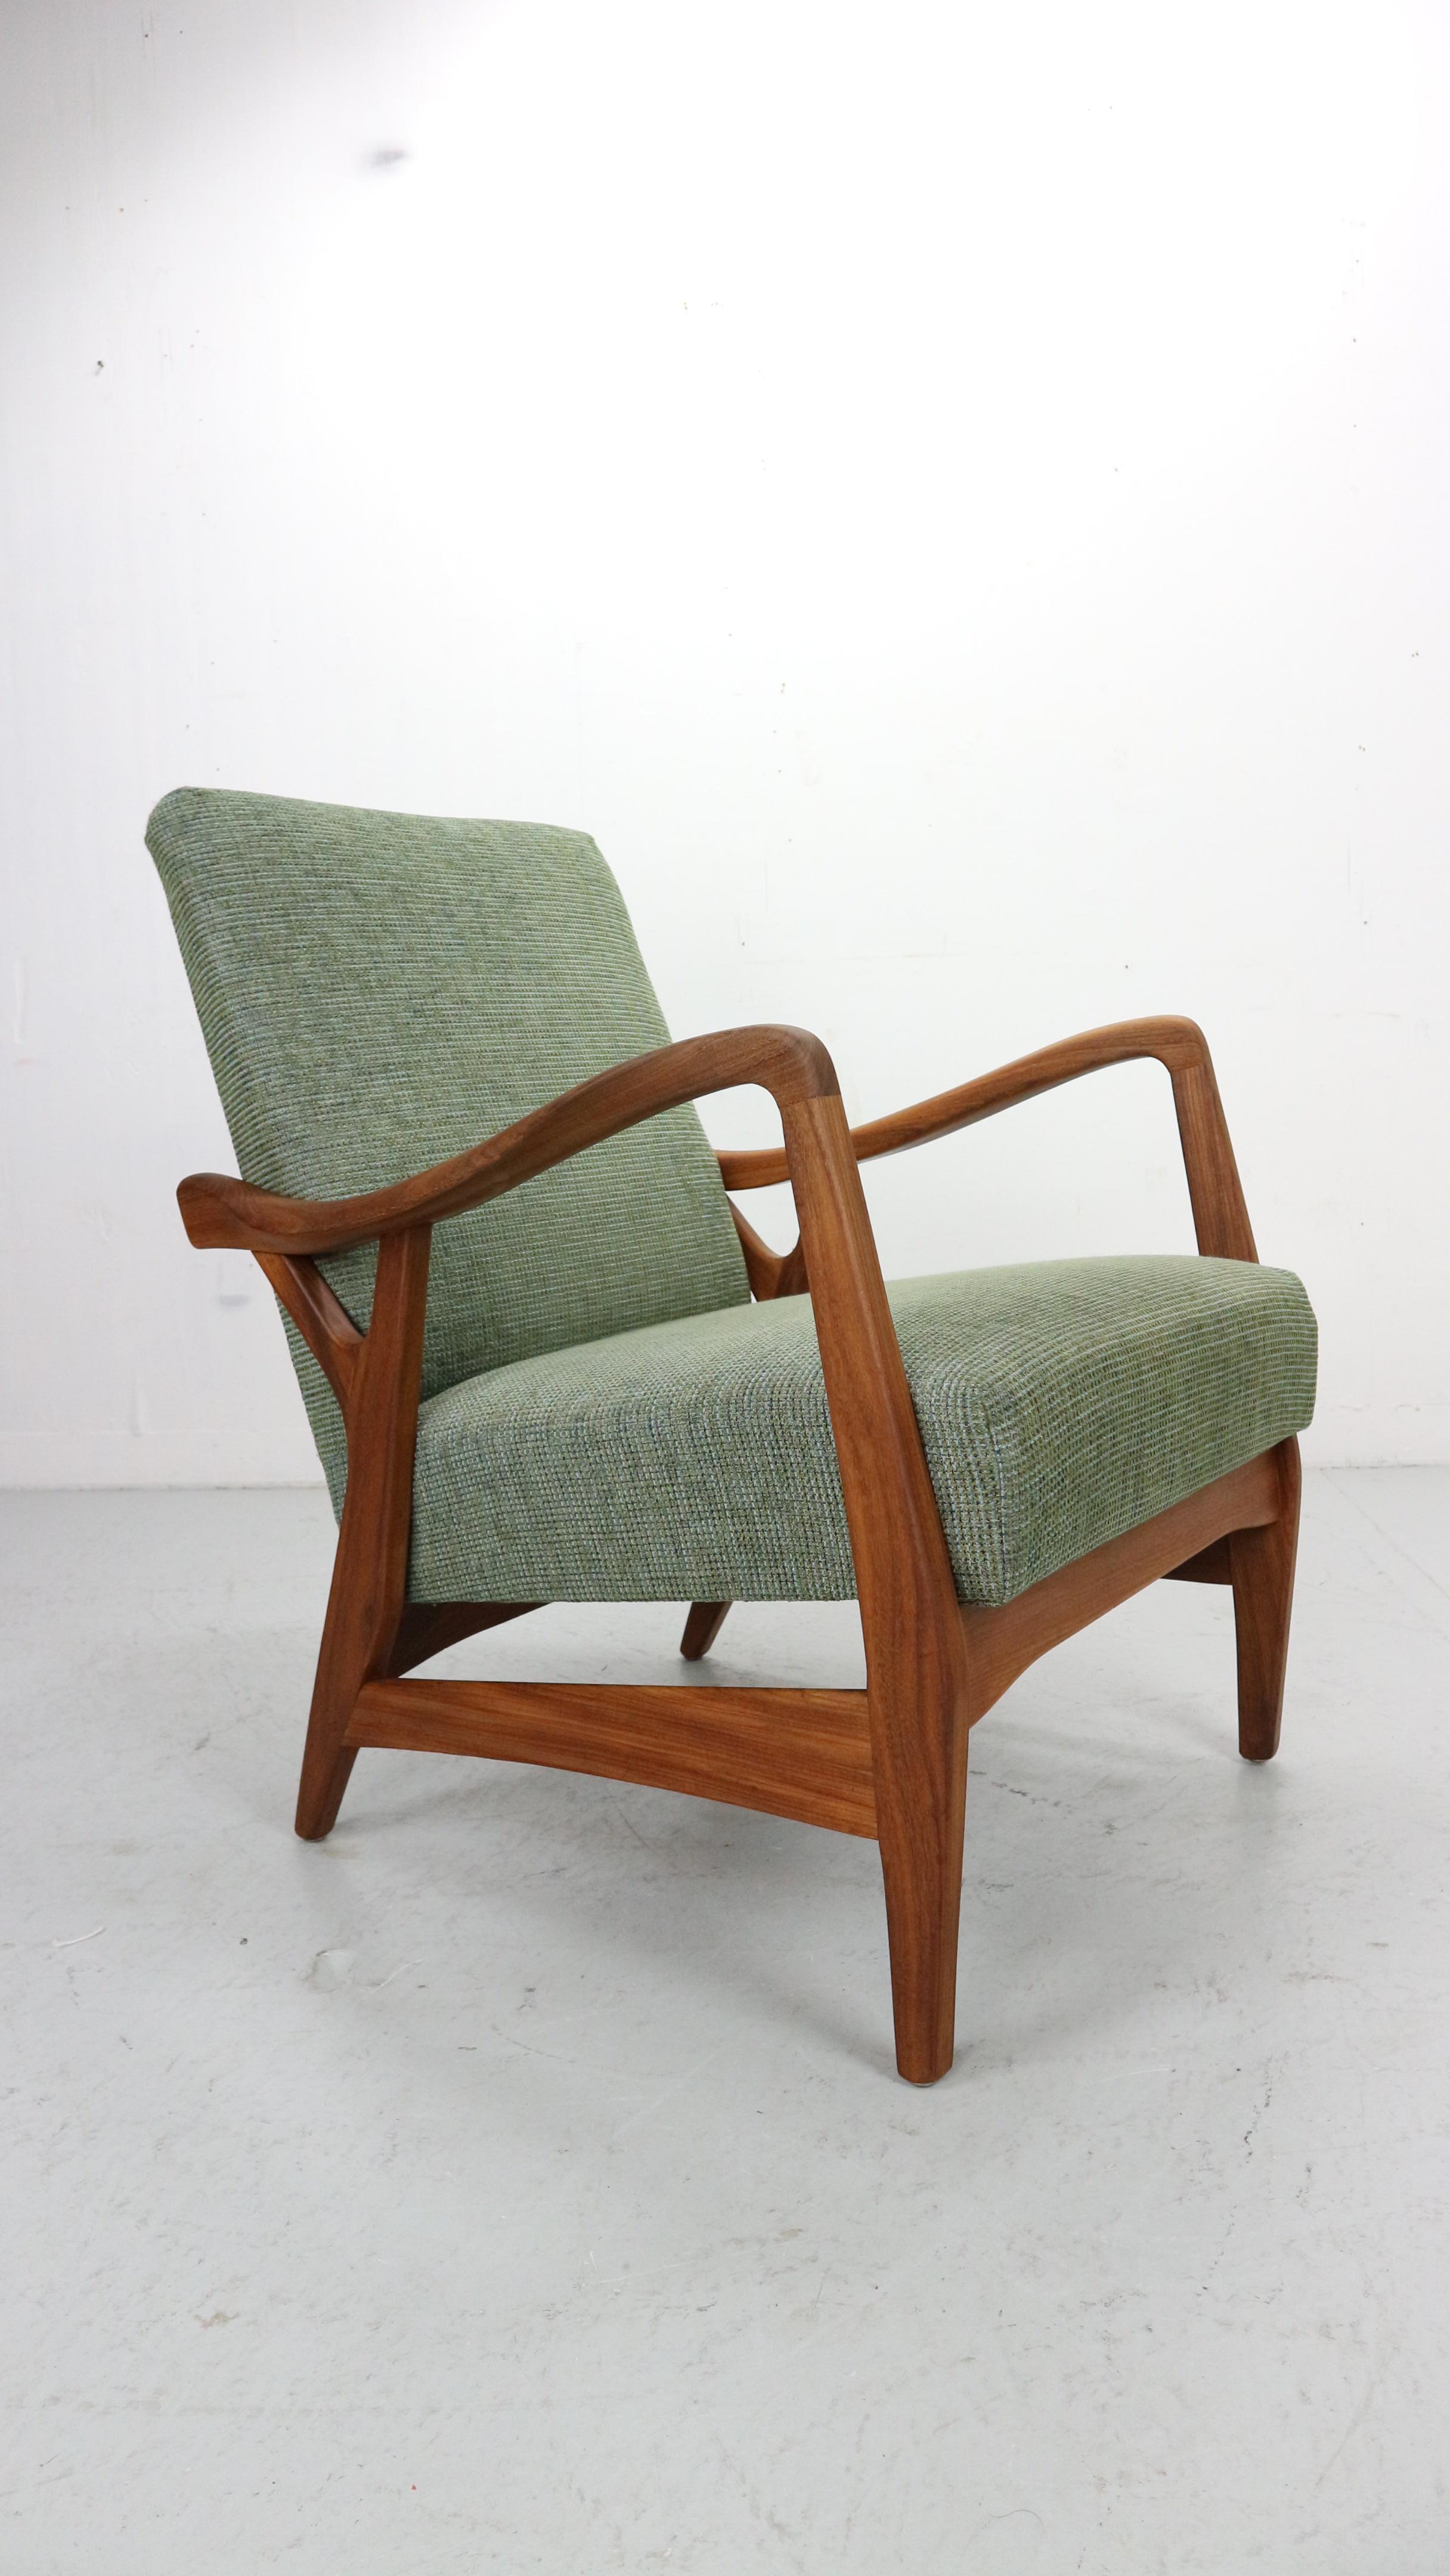 Lovely lounge chair, designed and fabricated in the 1960s in Denmark.

The elegant structure of this comfortable chair is made of solid teak.